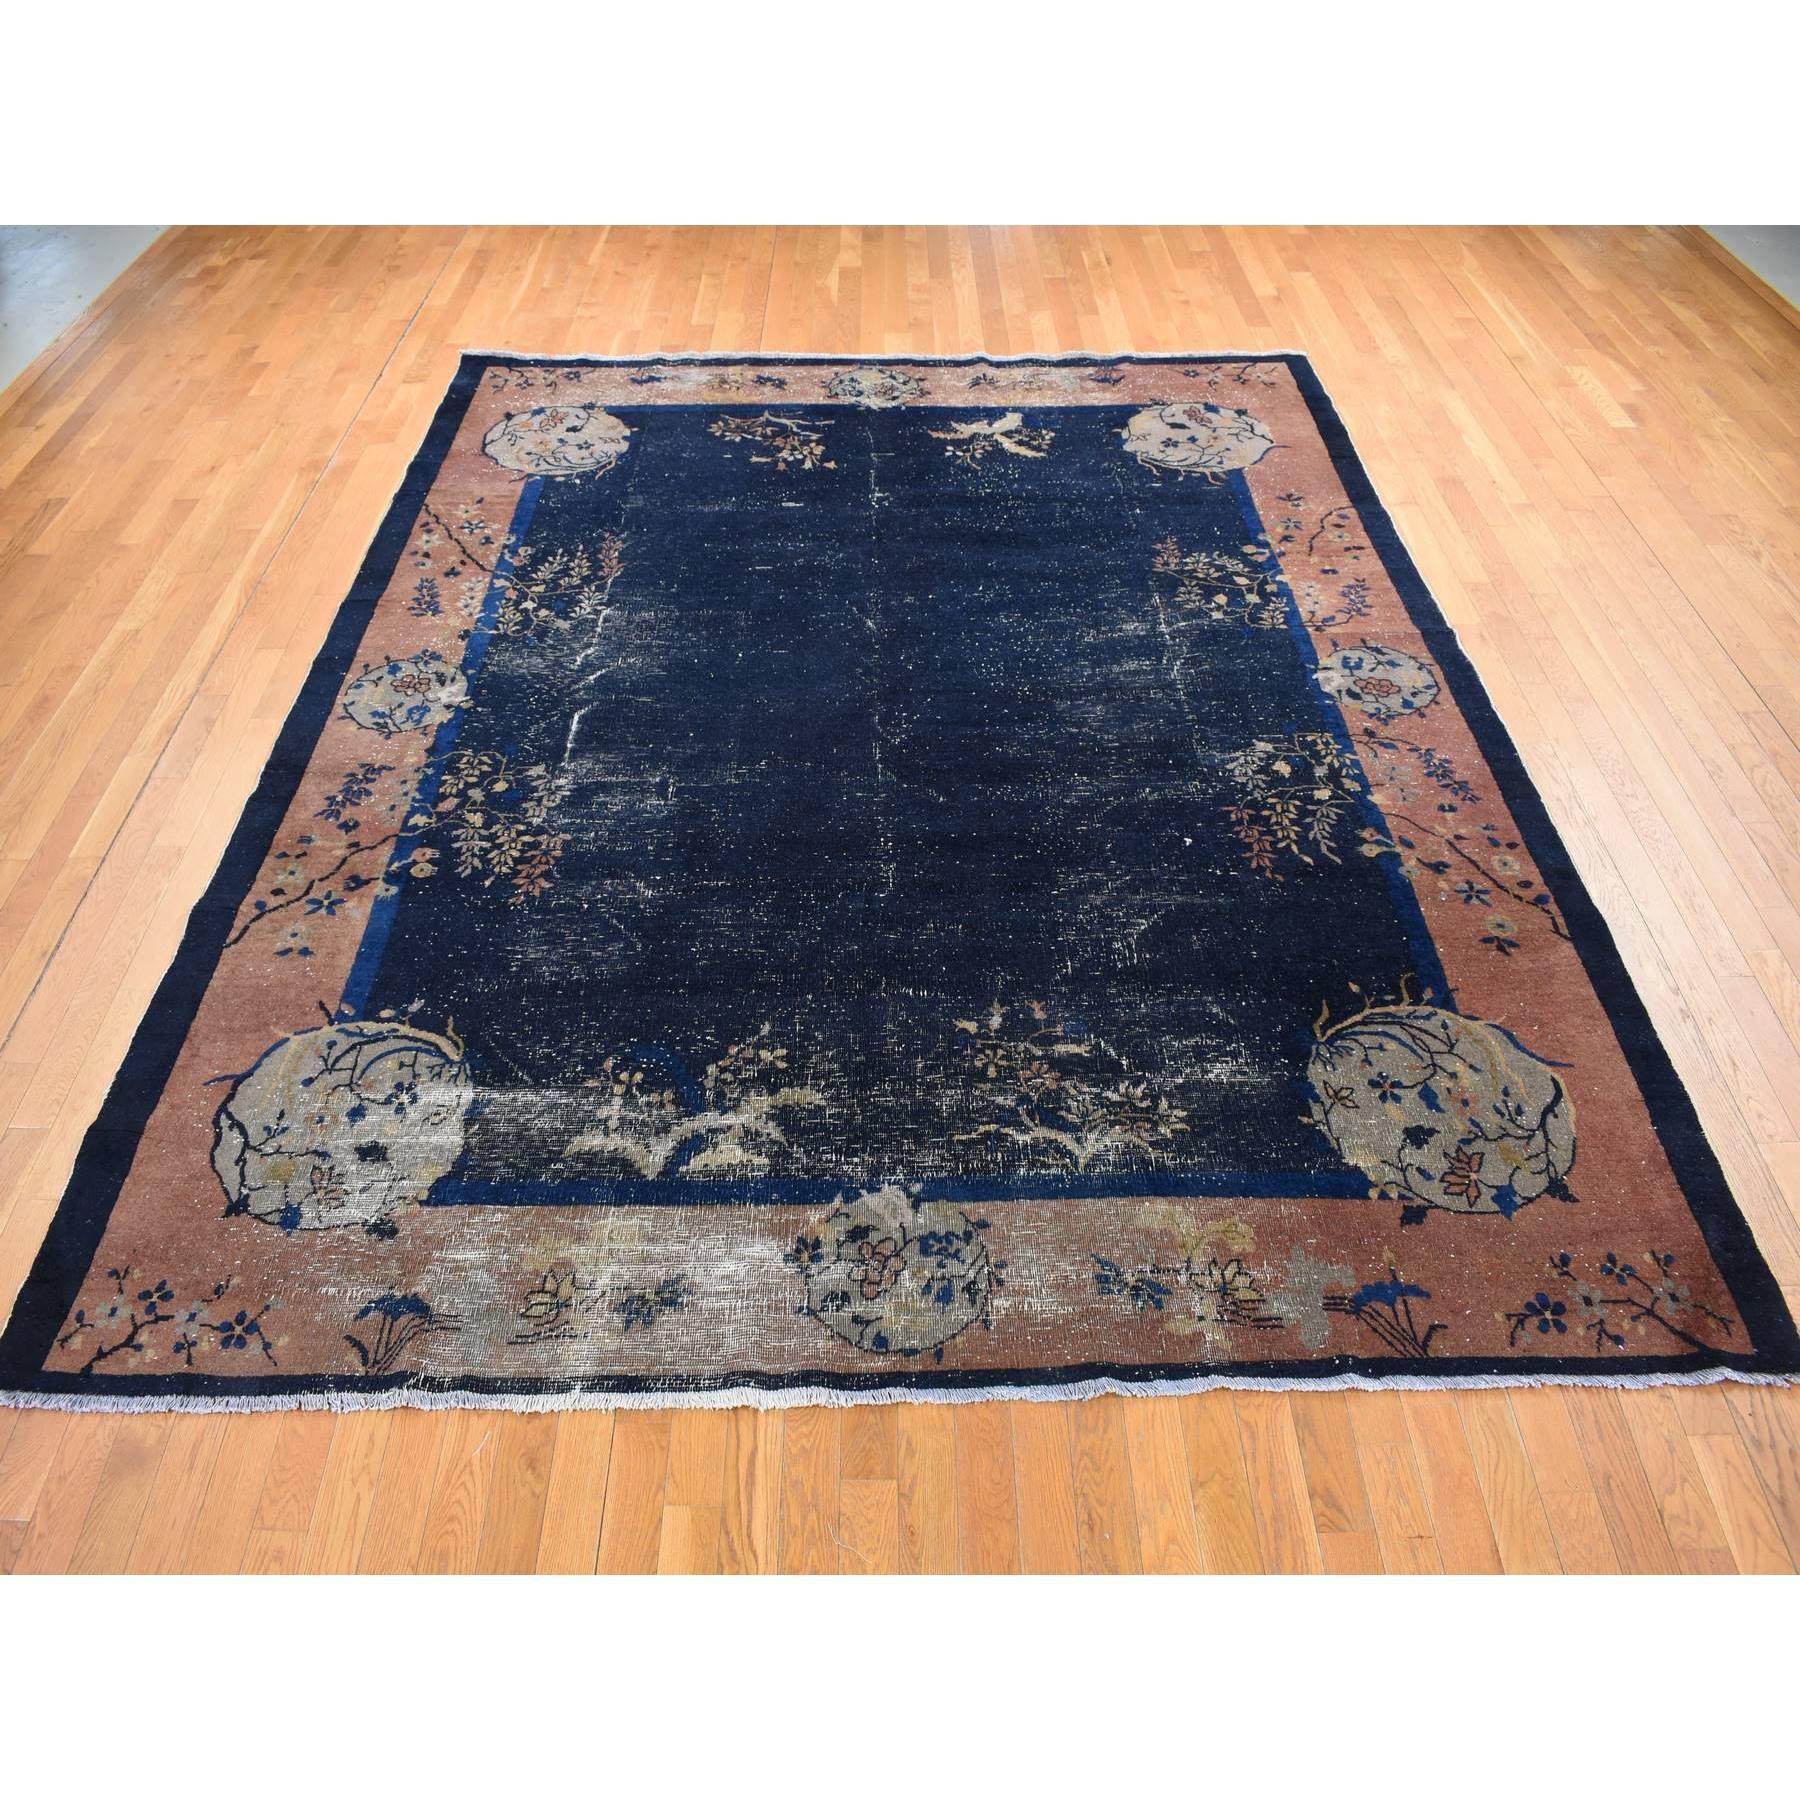 Medieval Midnight Blue Antique Chinese Peking Clean Hand Knotted Pure Wool Even Wear Rug